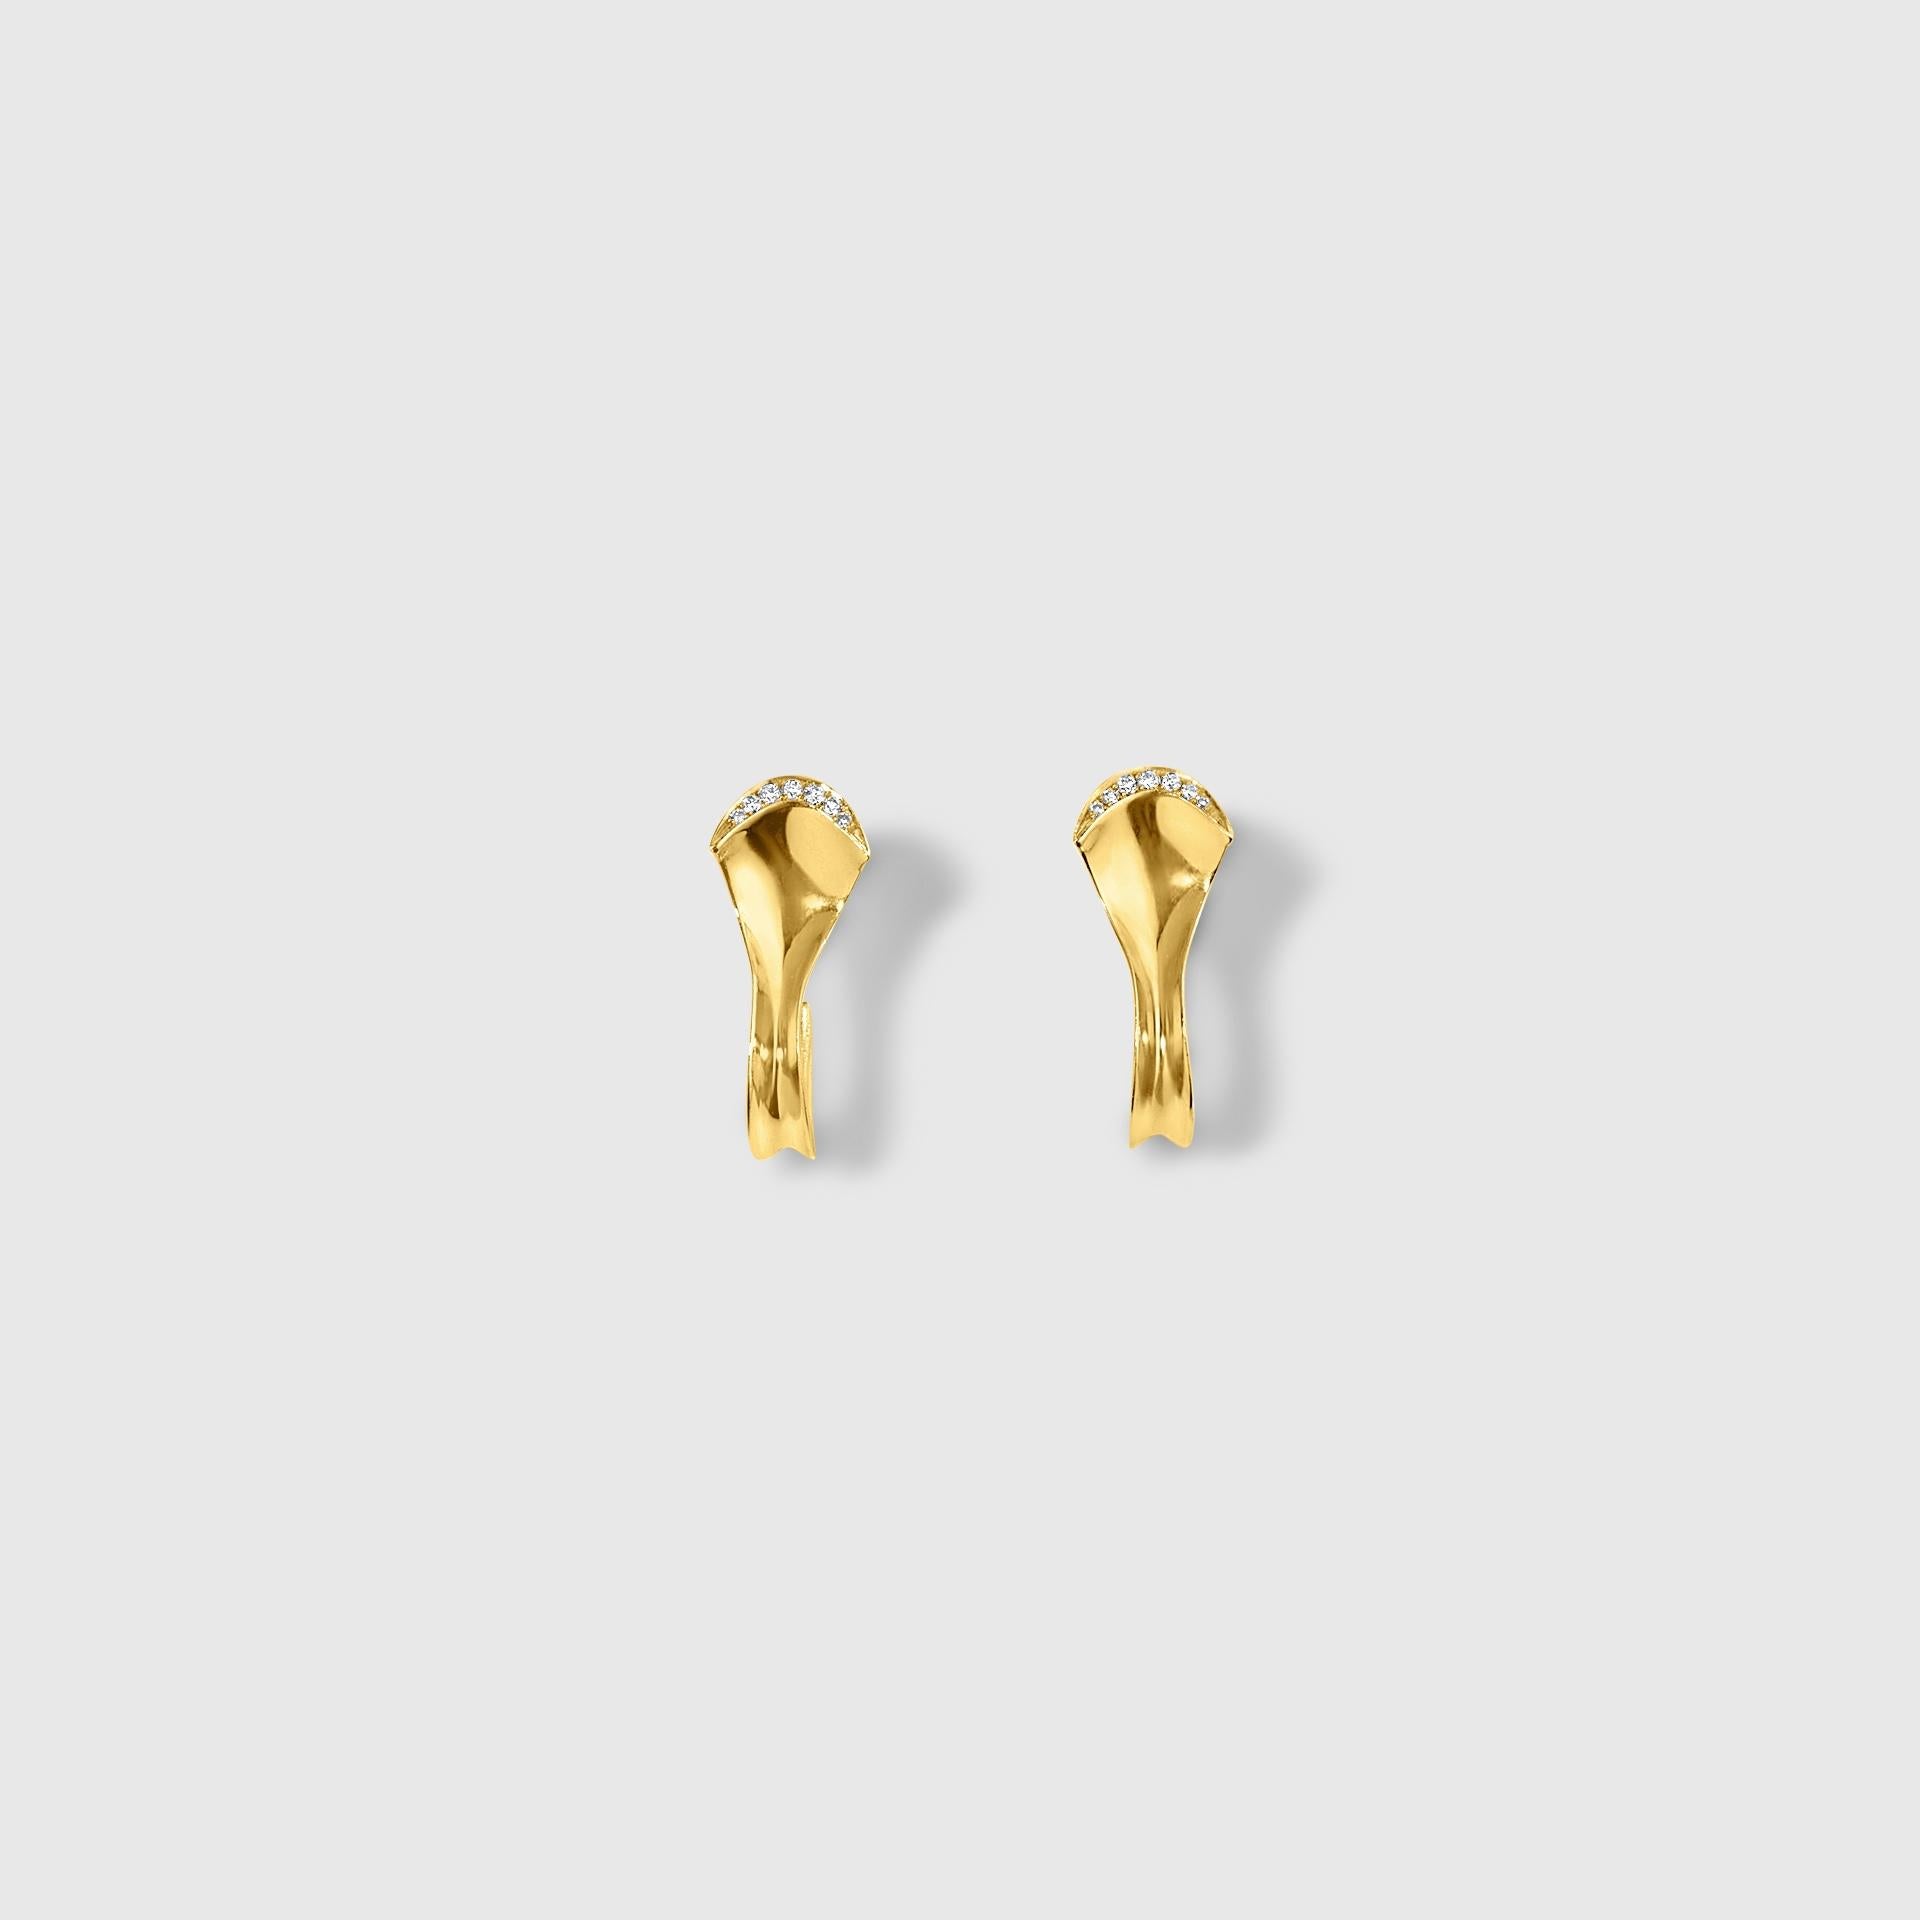 Sculptural Contemporary, Couture 18K Gold Earrings with Natural White Diamonds For Sale 10